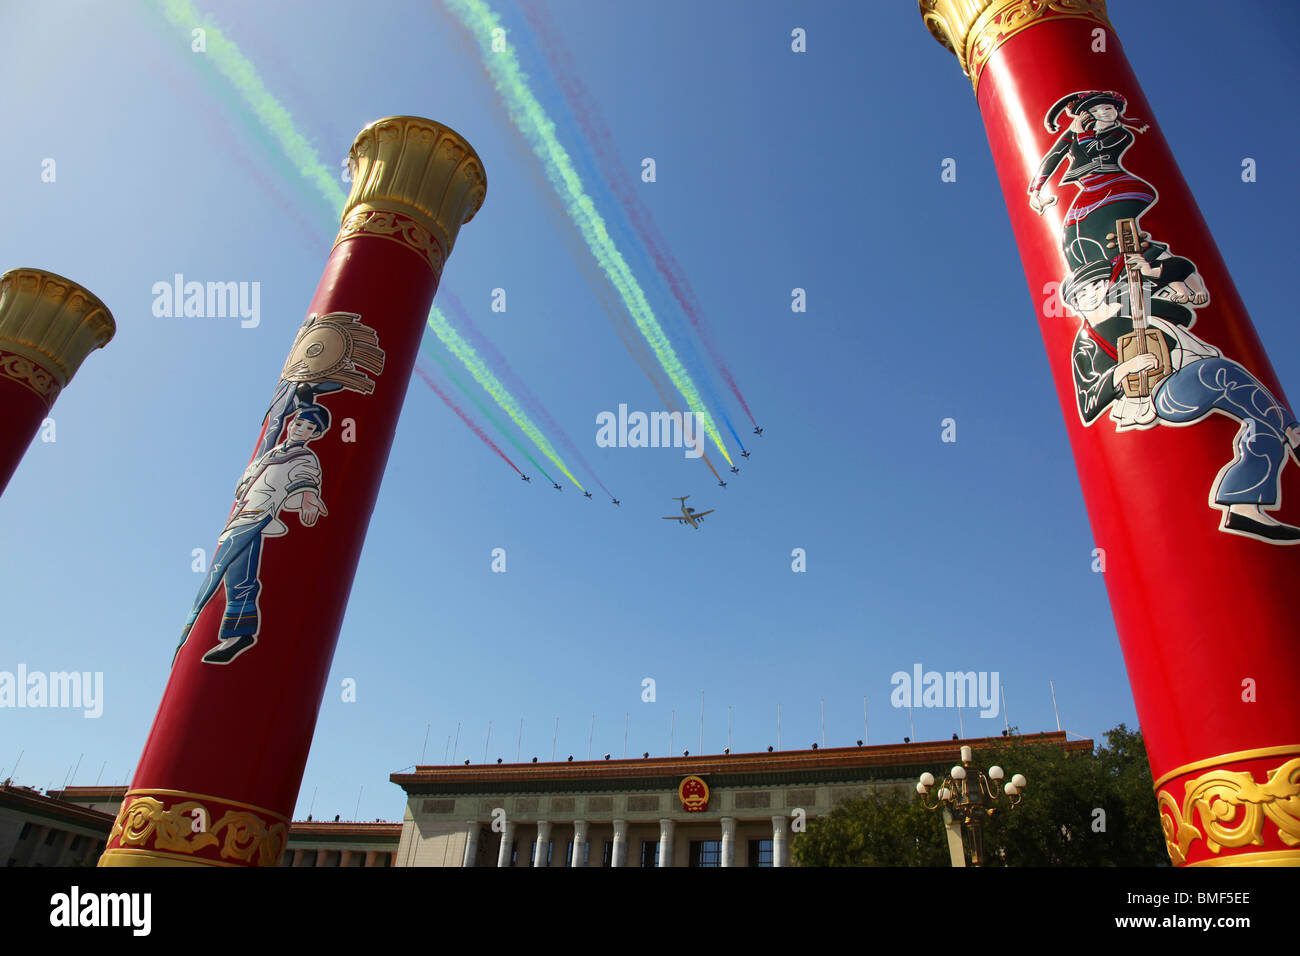 Fighter aircrafts flying over Tian'anmen Square, The 60th Anniversary of the People's Republic of China, Beijing, China Stock Photo